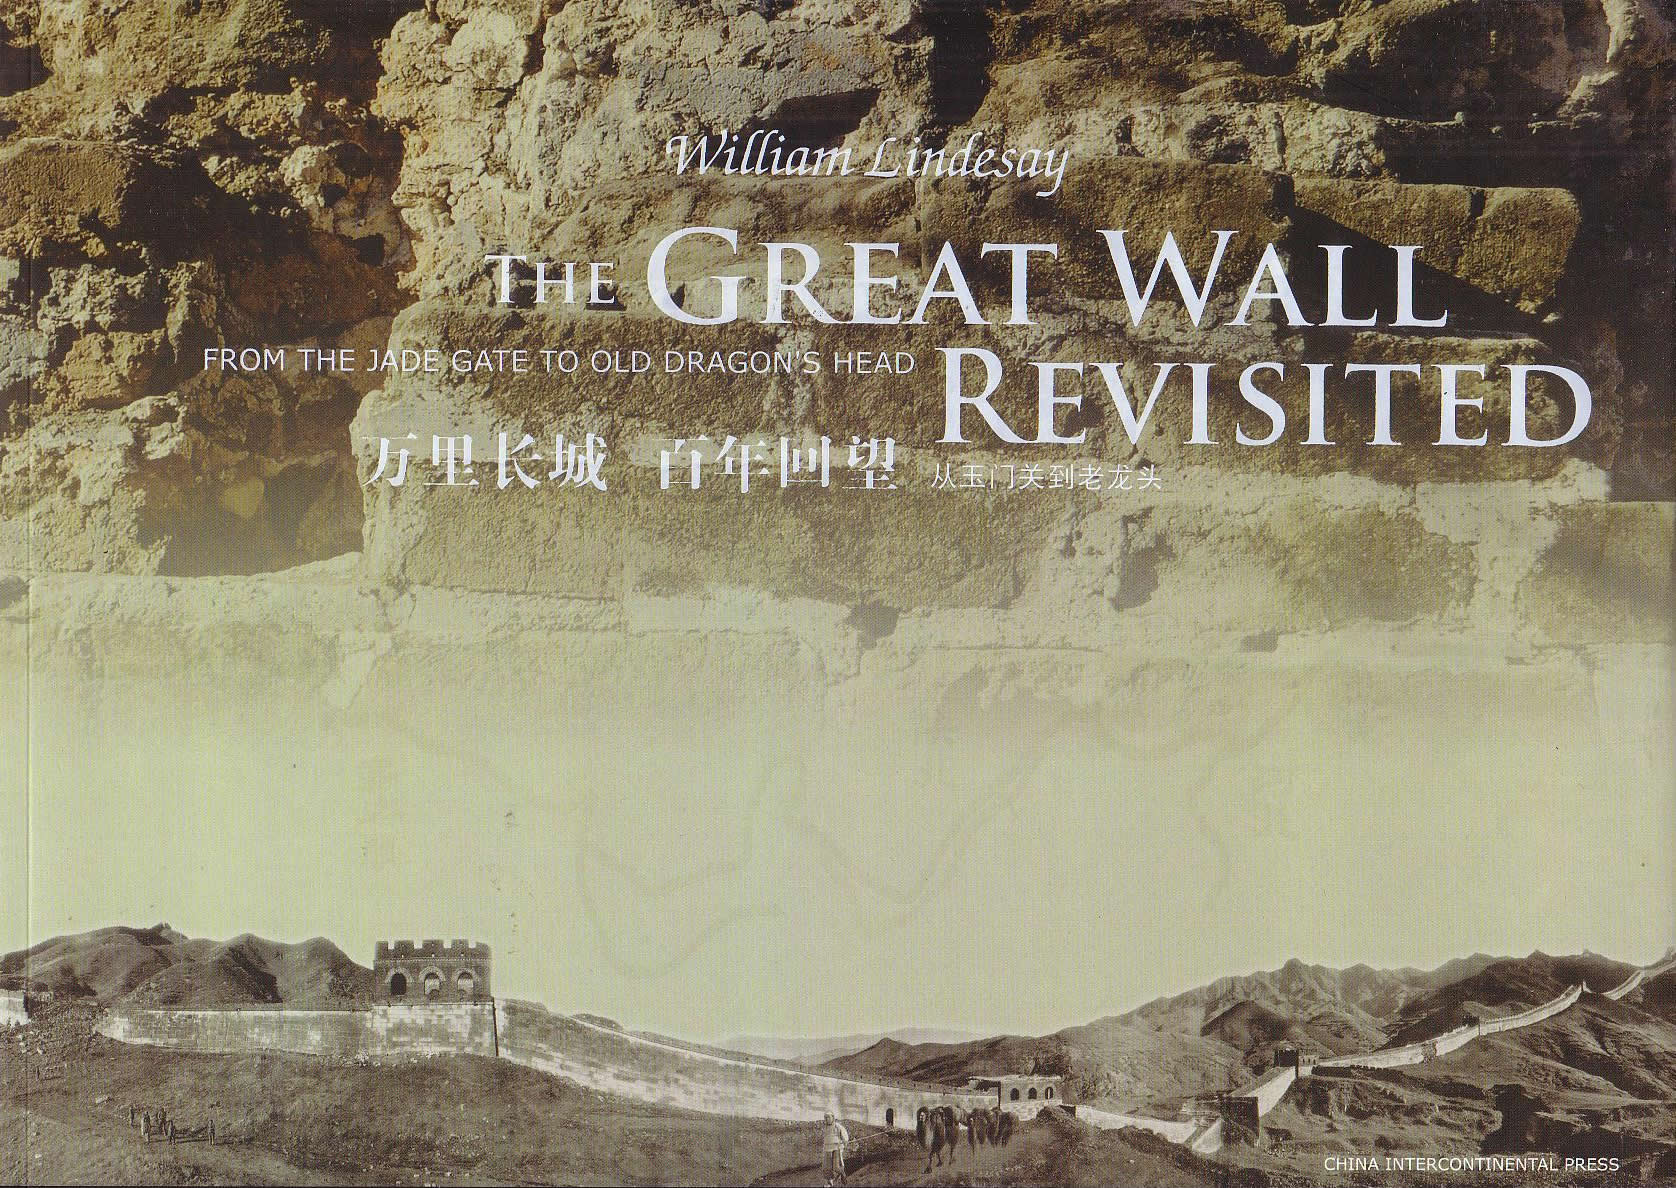 The Great Wall Revisited - From the Jade Gate to Old Dragon's Head<br>ISBN:7-5085-1032-1, 7508510321, 9787508510323